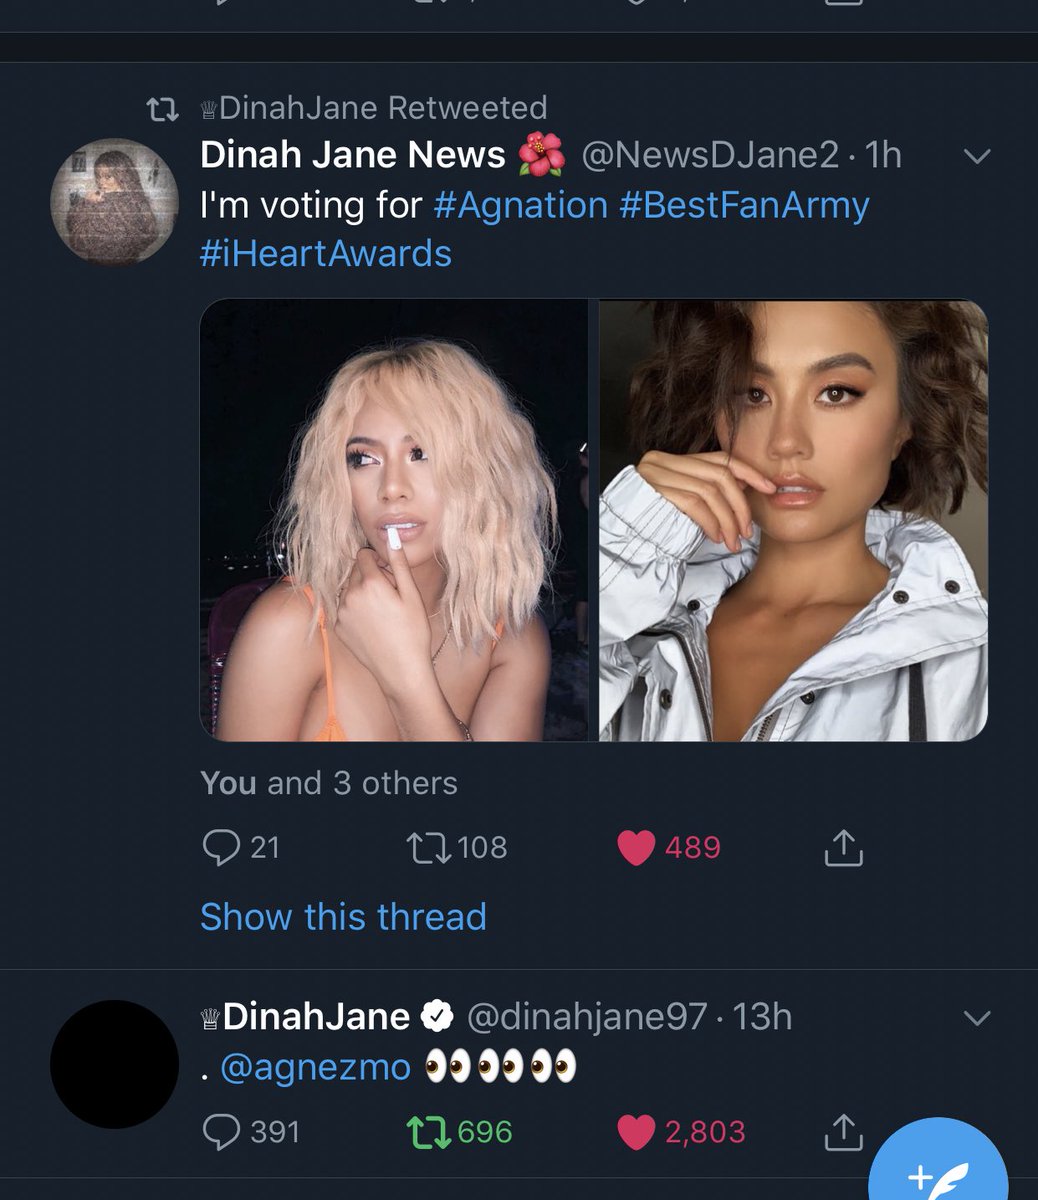 Tx for the retweet and the support girl!! 🥰🥰😘 @dinahjane97 
Lets vote nooow!!! #AGNATION #BestFanArmy #iHeartAwards 